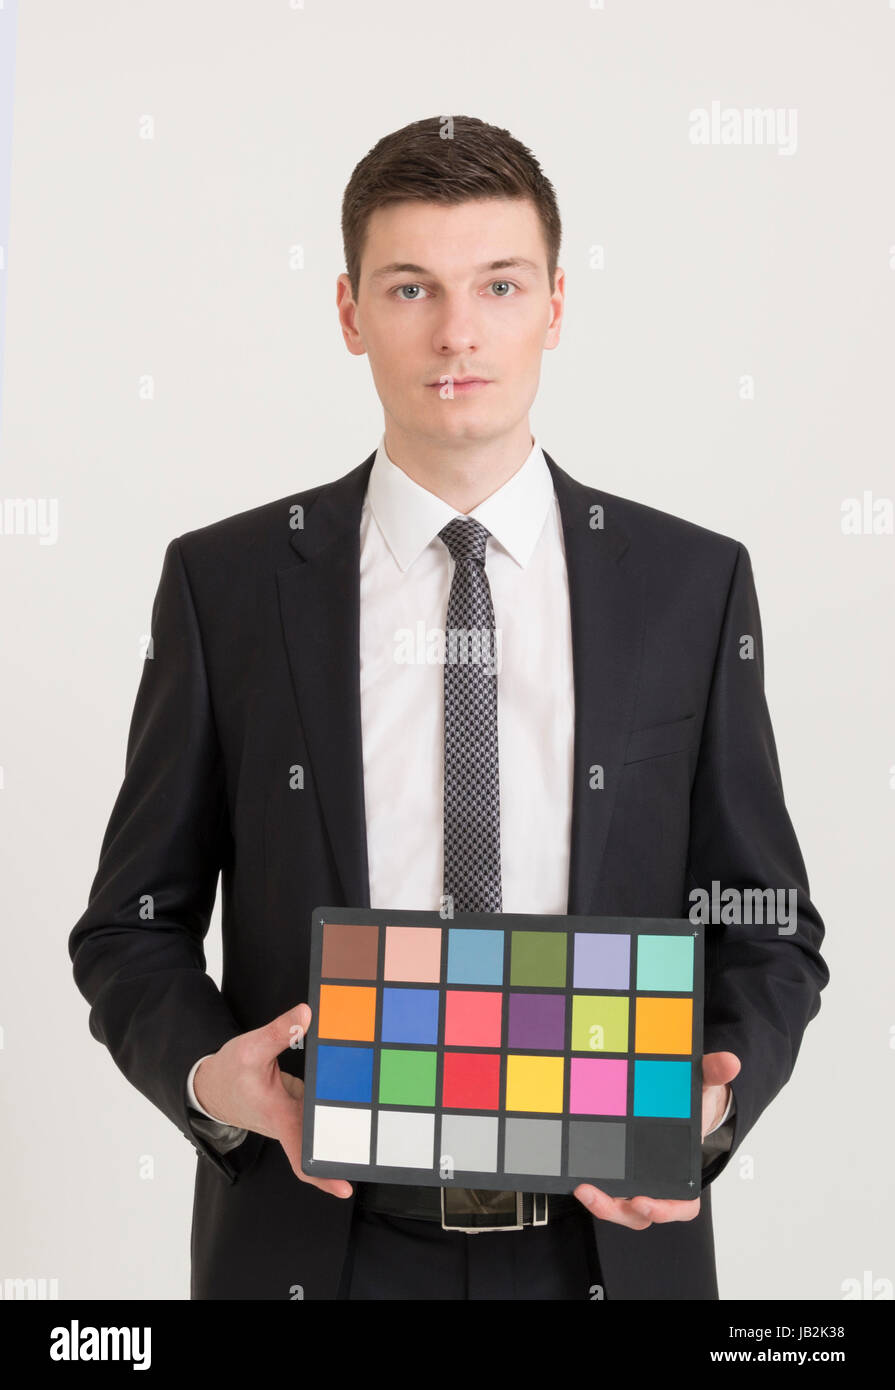 Young photographer holding color checker card Stock Photo